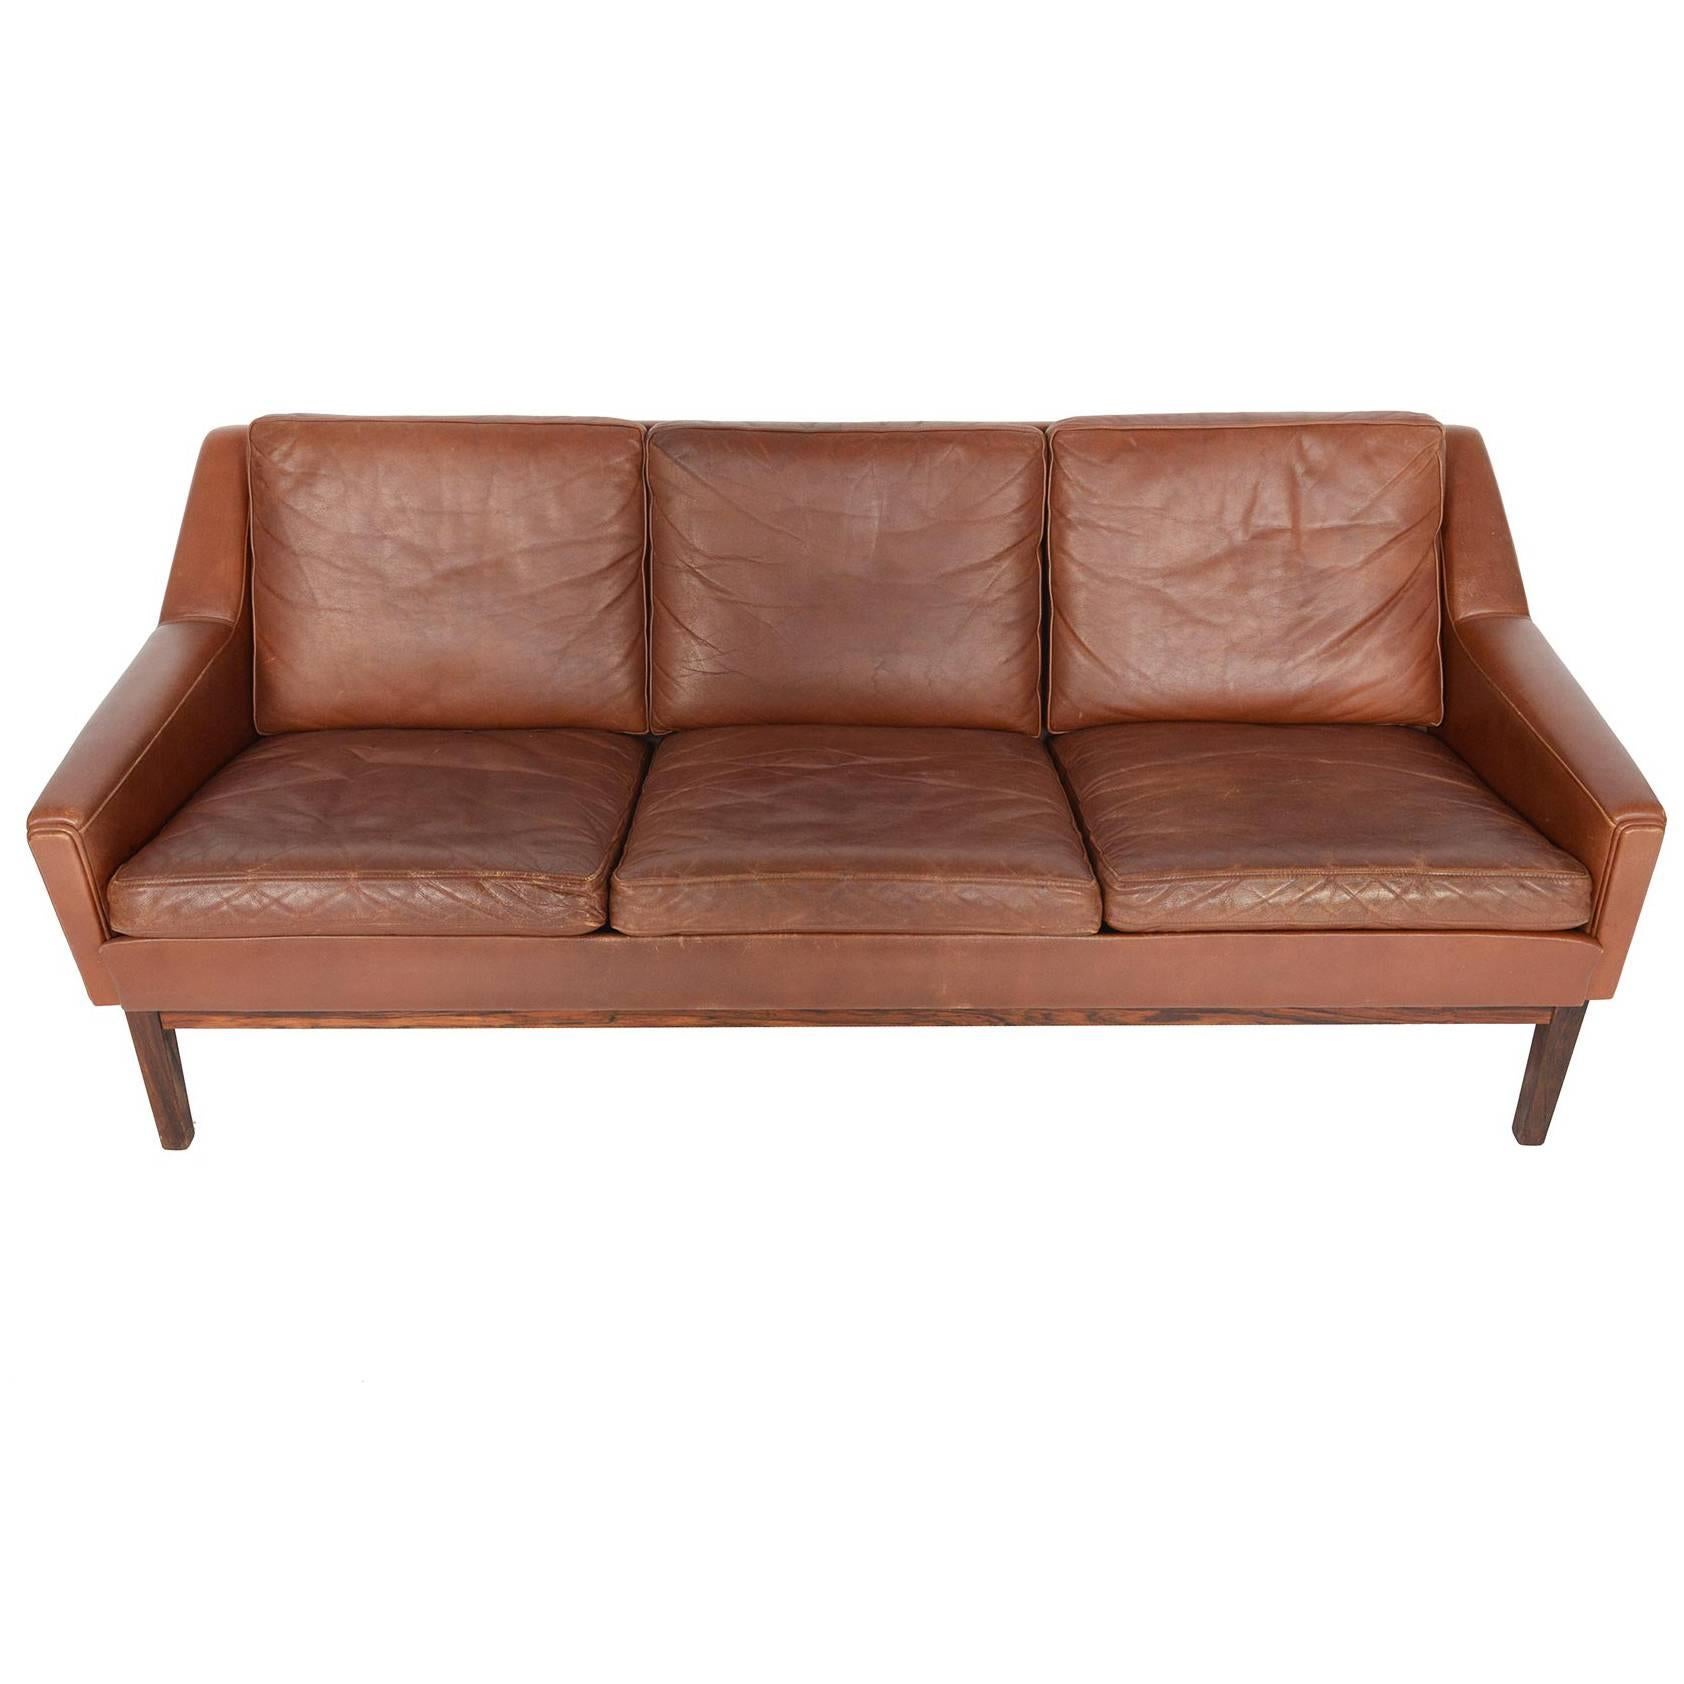 Danish Mid-Century Modern Sofa in Rosewood + Patinated Rust Leather